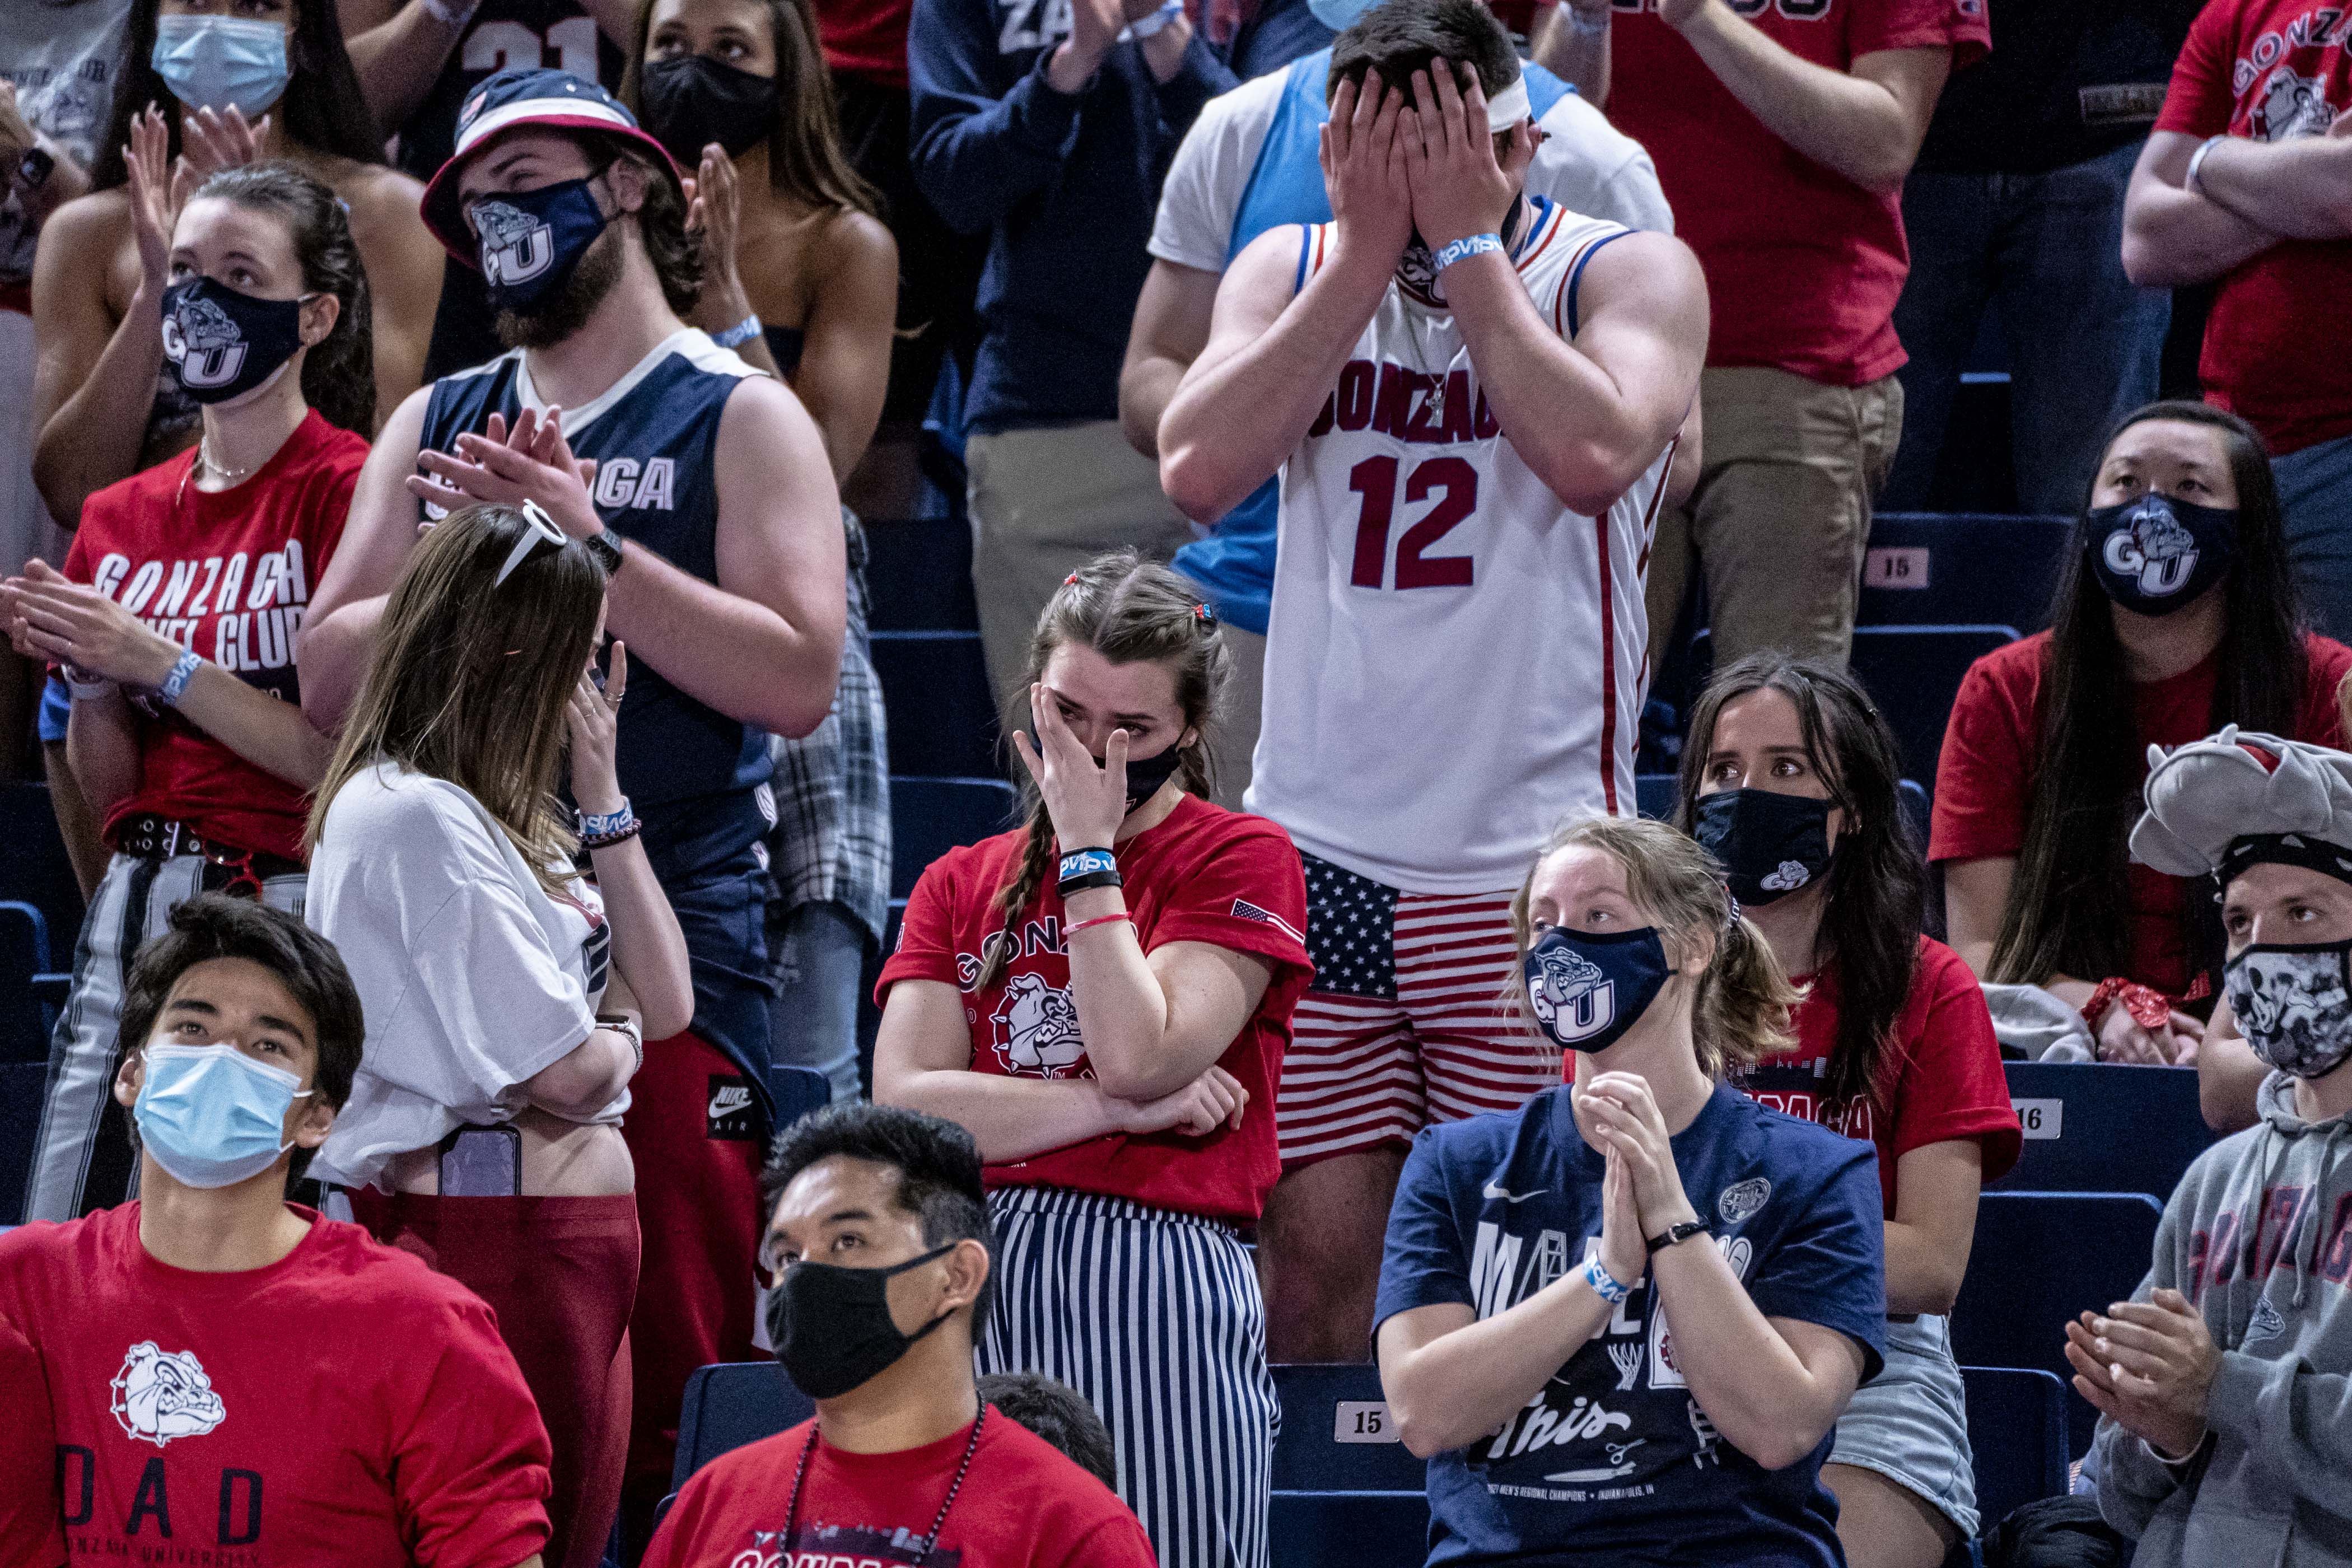 Gonzaga University students react during a watch party at the McCarthey Athletic Center at Gonzaga University on April 5, 2021 in Spokane, Washington. 